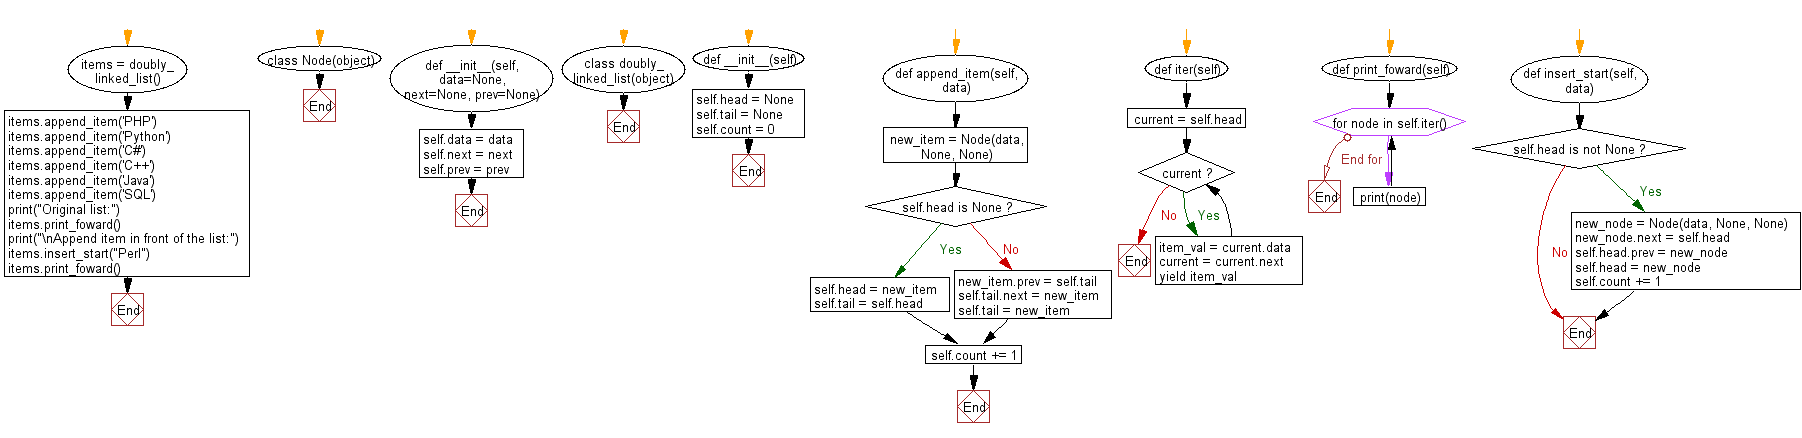 Flowchart: Insert an item in front of a given doubly linked list.